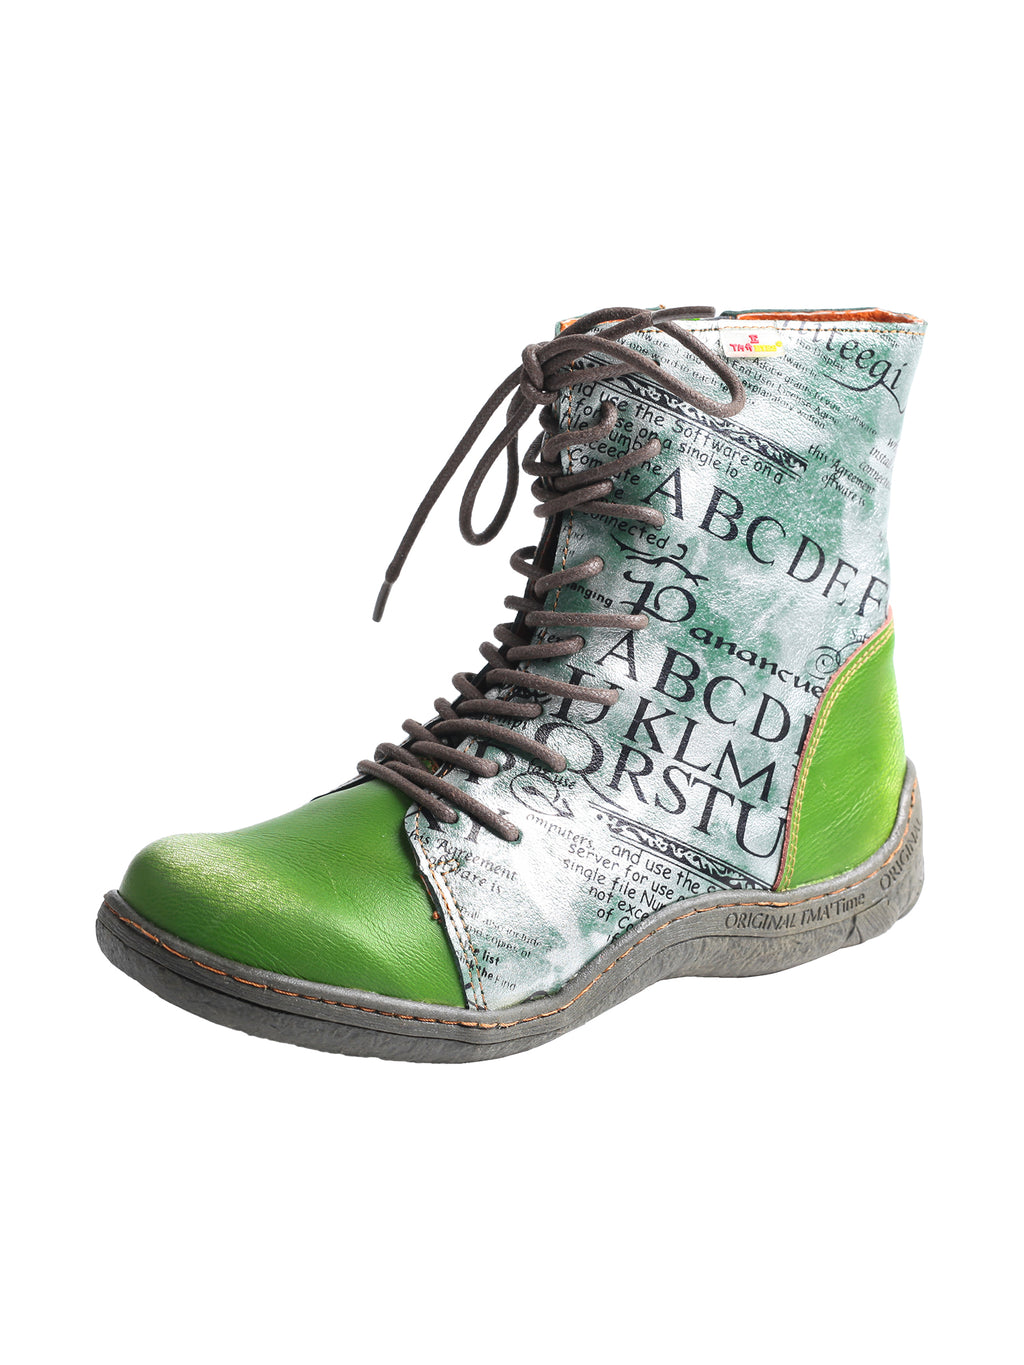 TMA EYES Women's Leather Ankle Boots Lace-Up Patchwork Letter Printing Leather Boots for Women